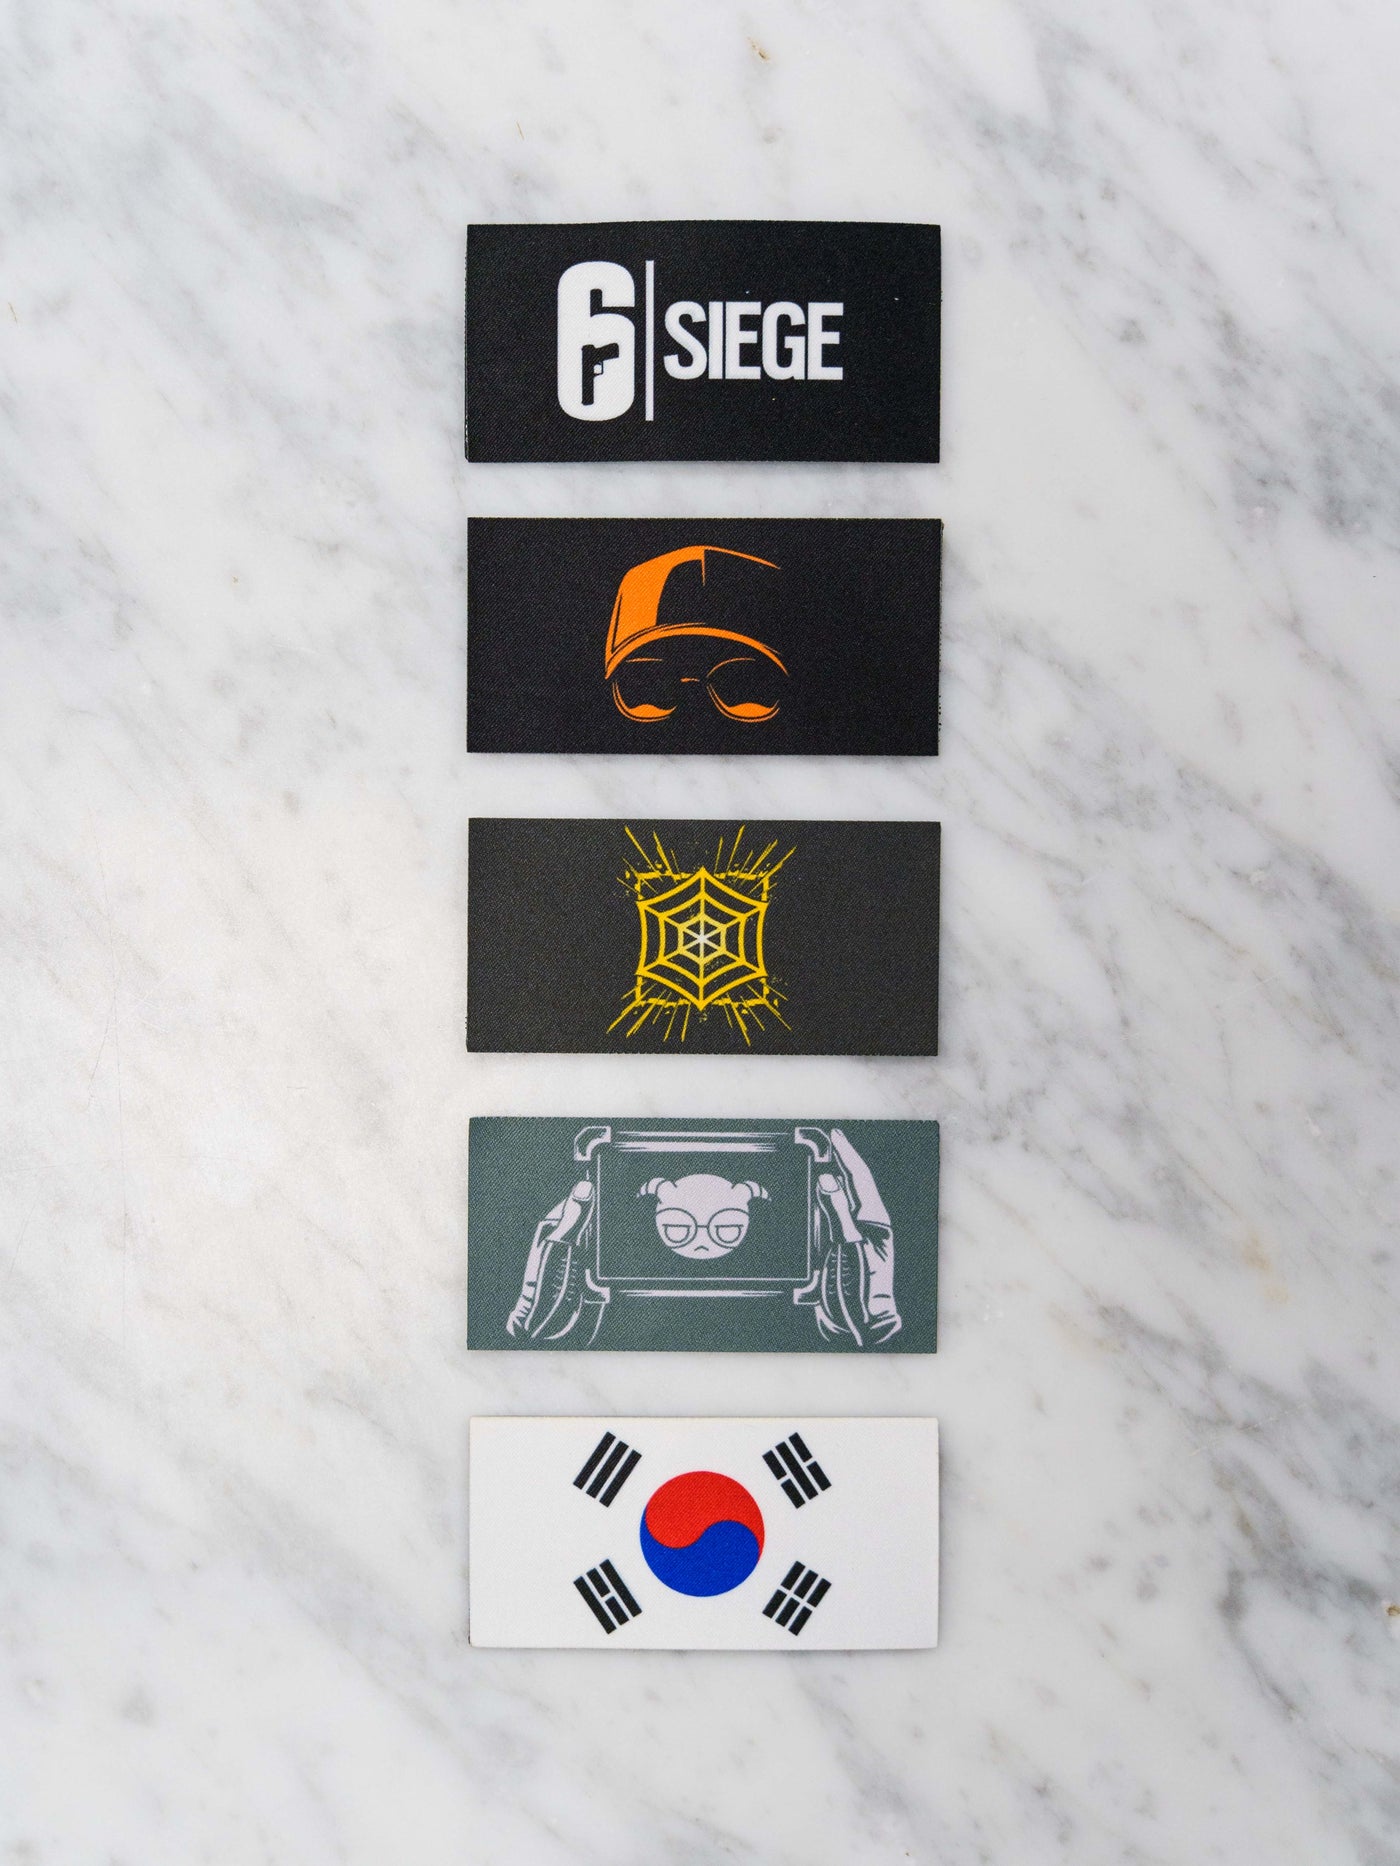 6 SIEGE Patch pack 3